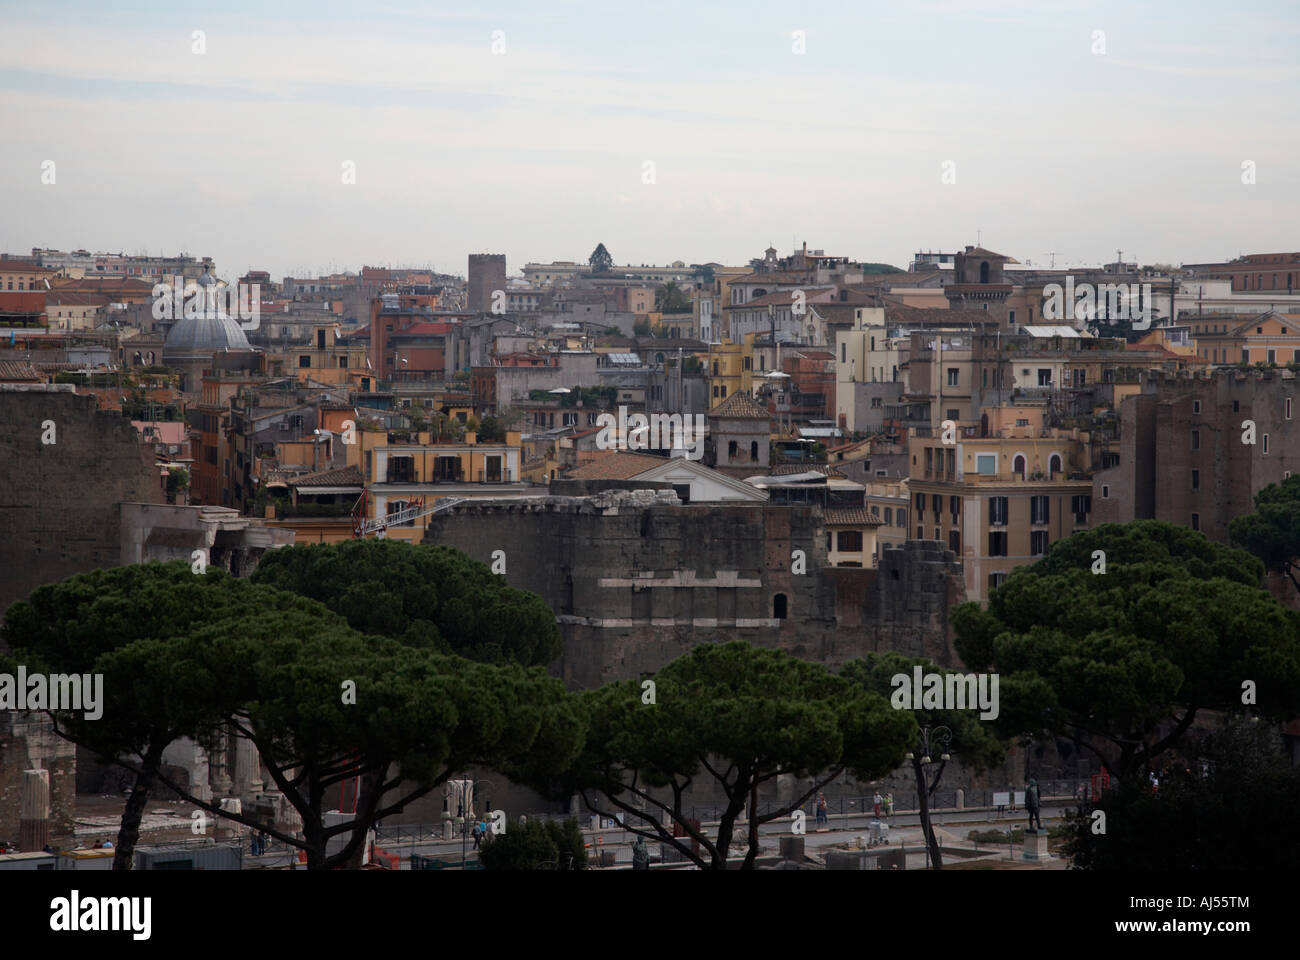 Looking out over the forum of agustus over rooftops in Rome Lazio Italy Stock Photo